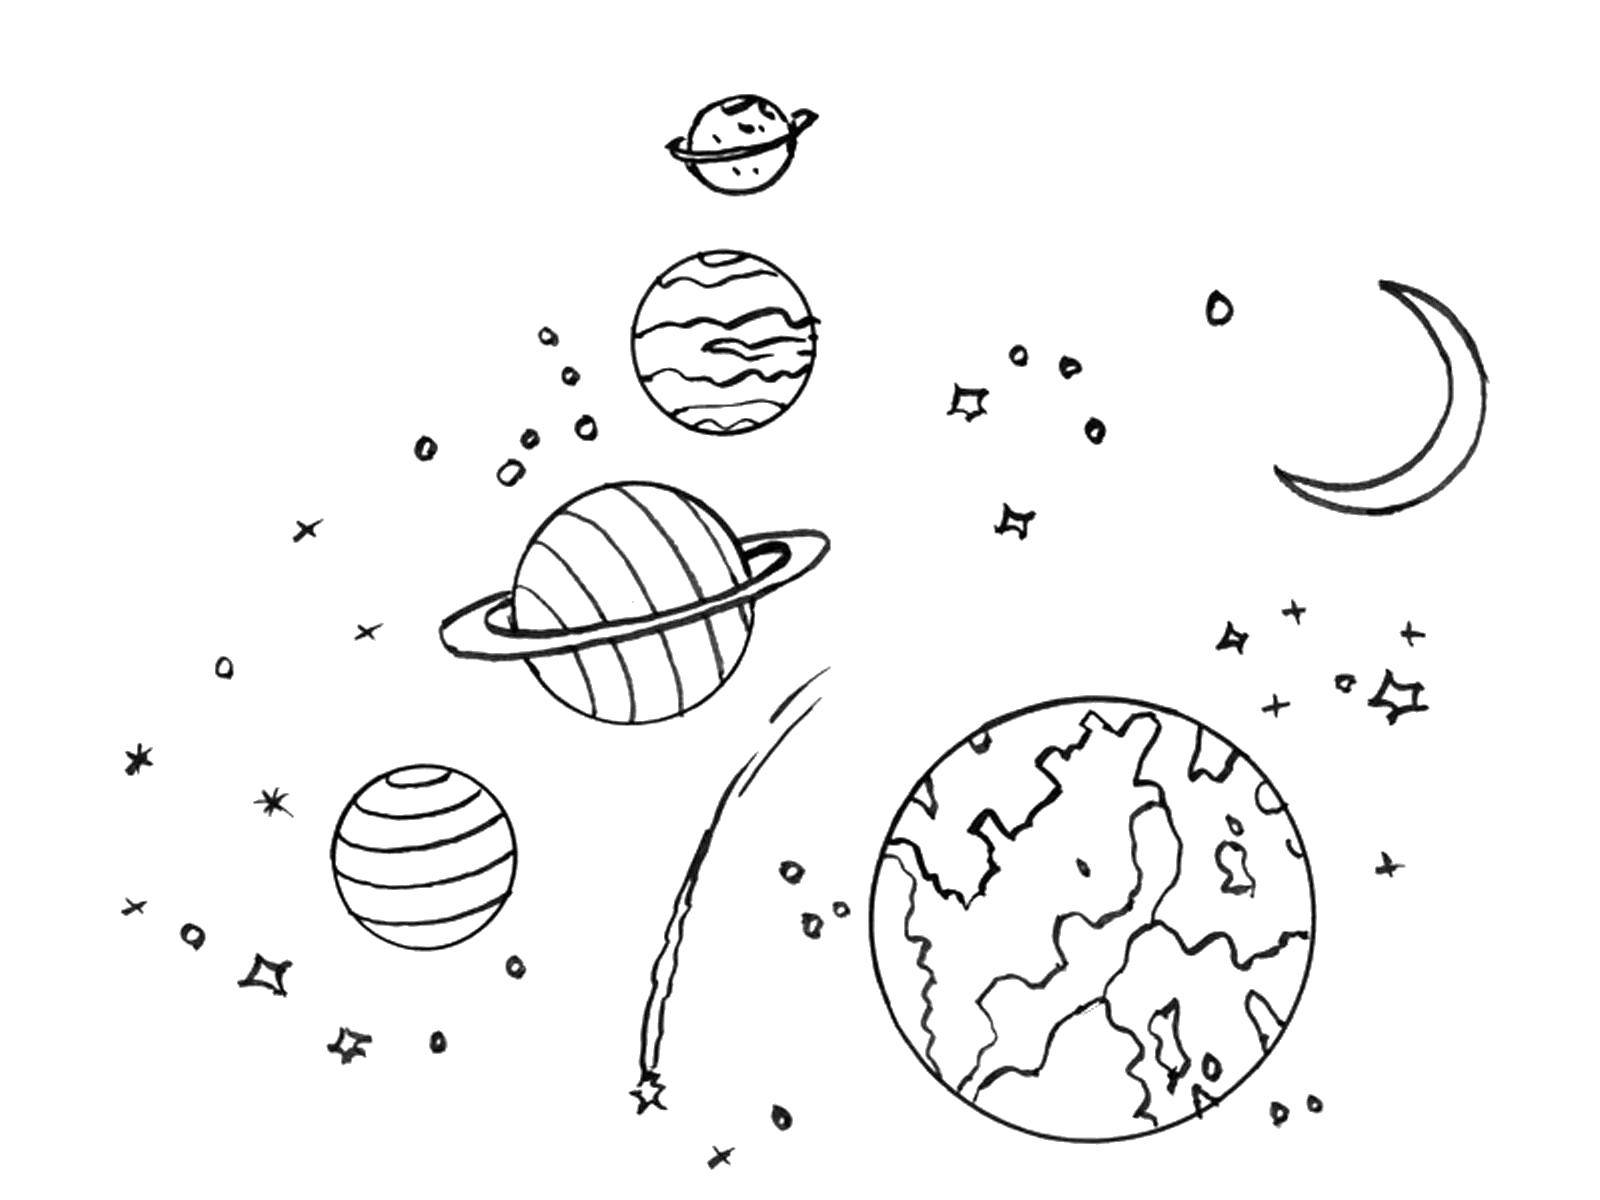 Coloring Planets of the solar system. Category space. Tags:  Space, planet, universe, Galaxy.